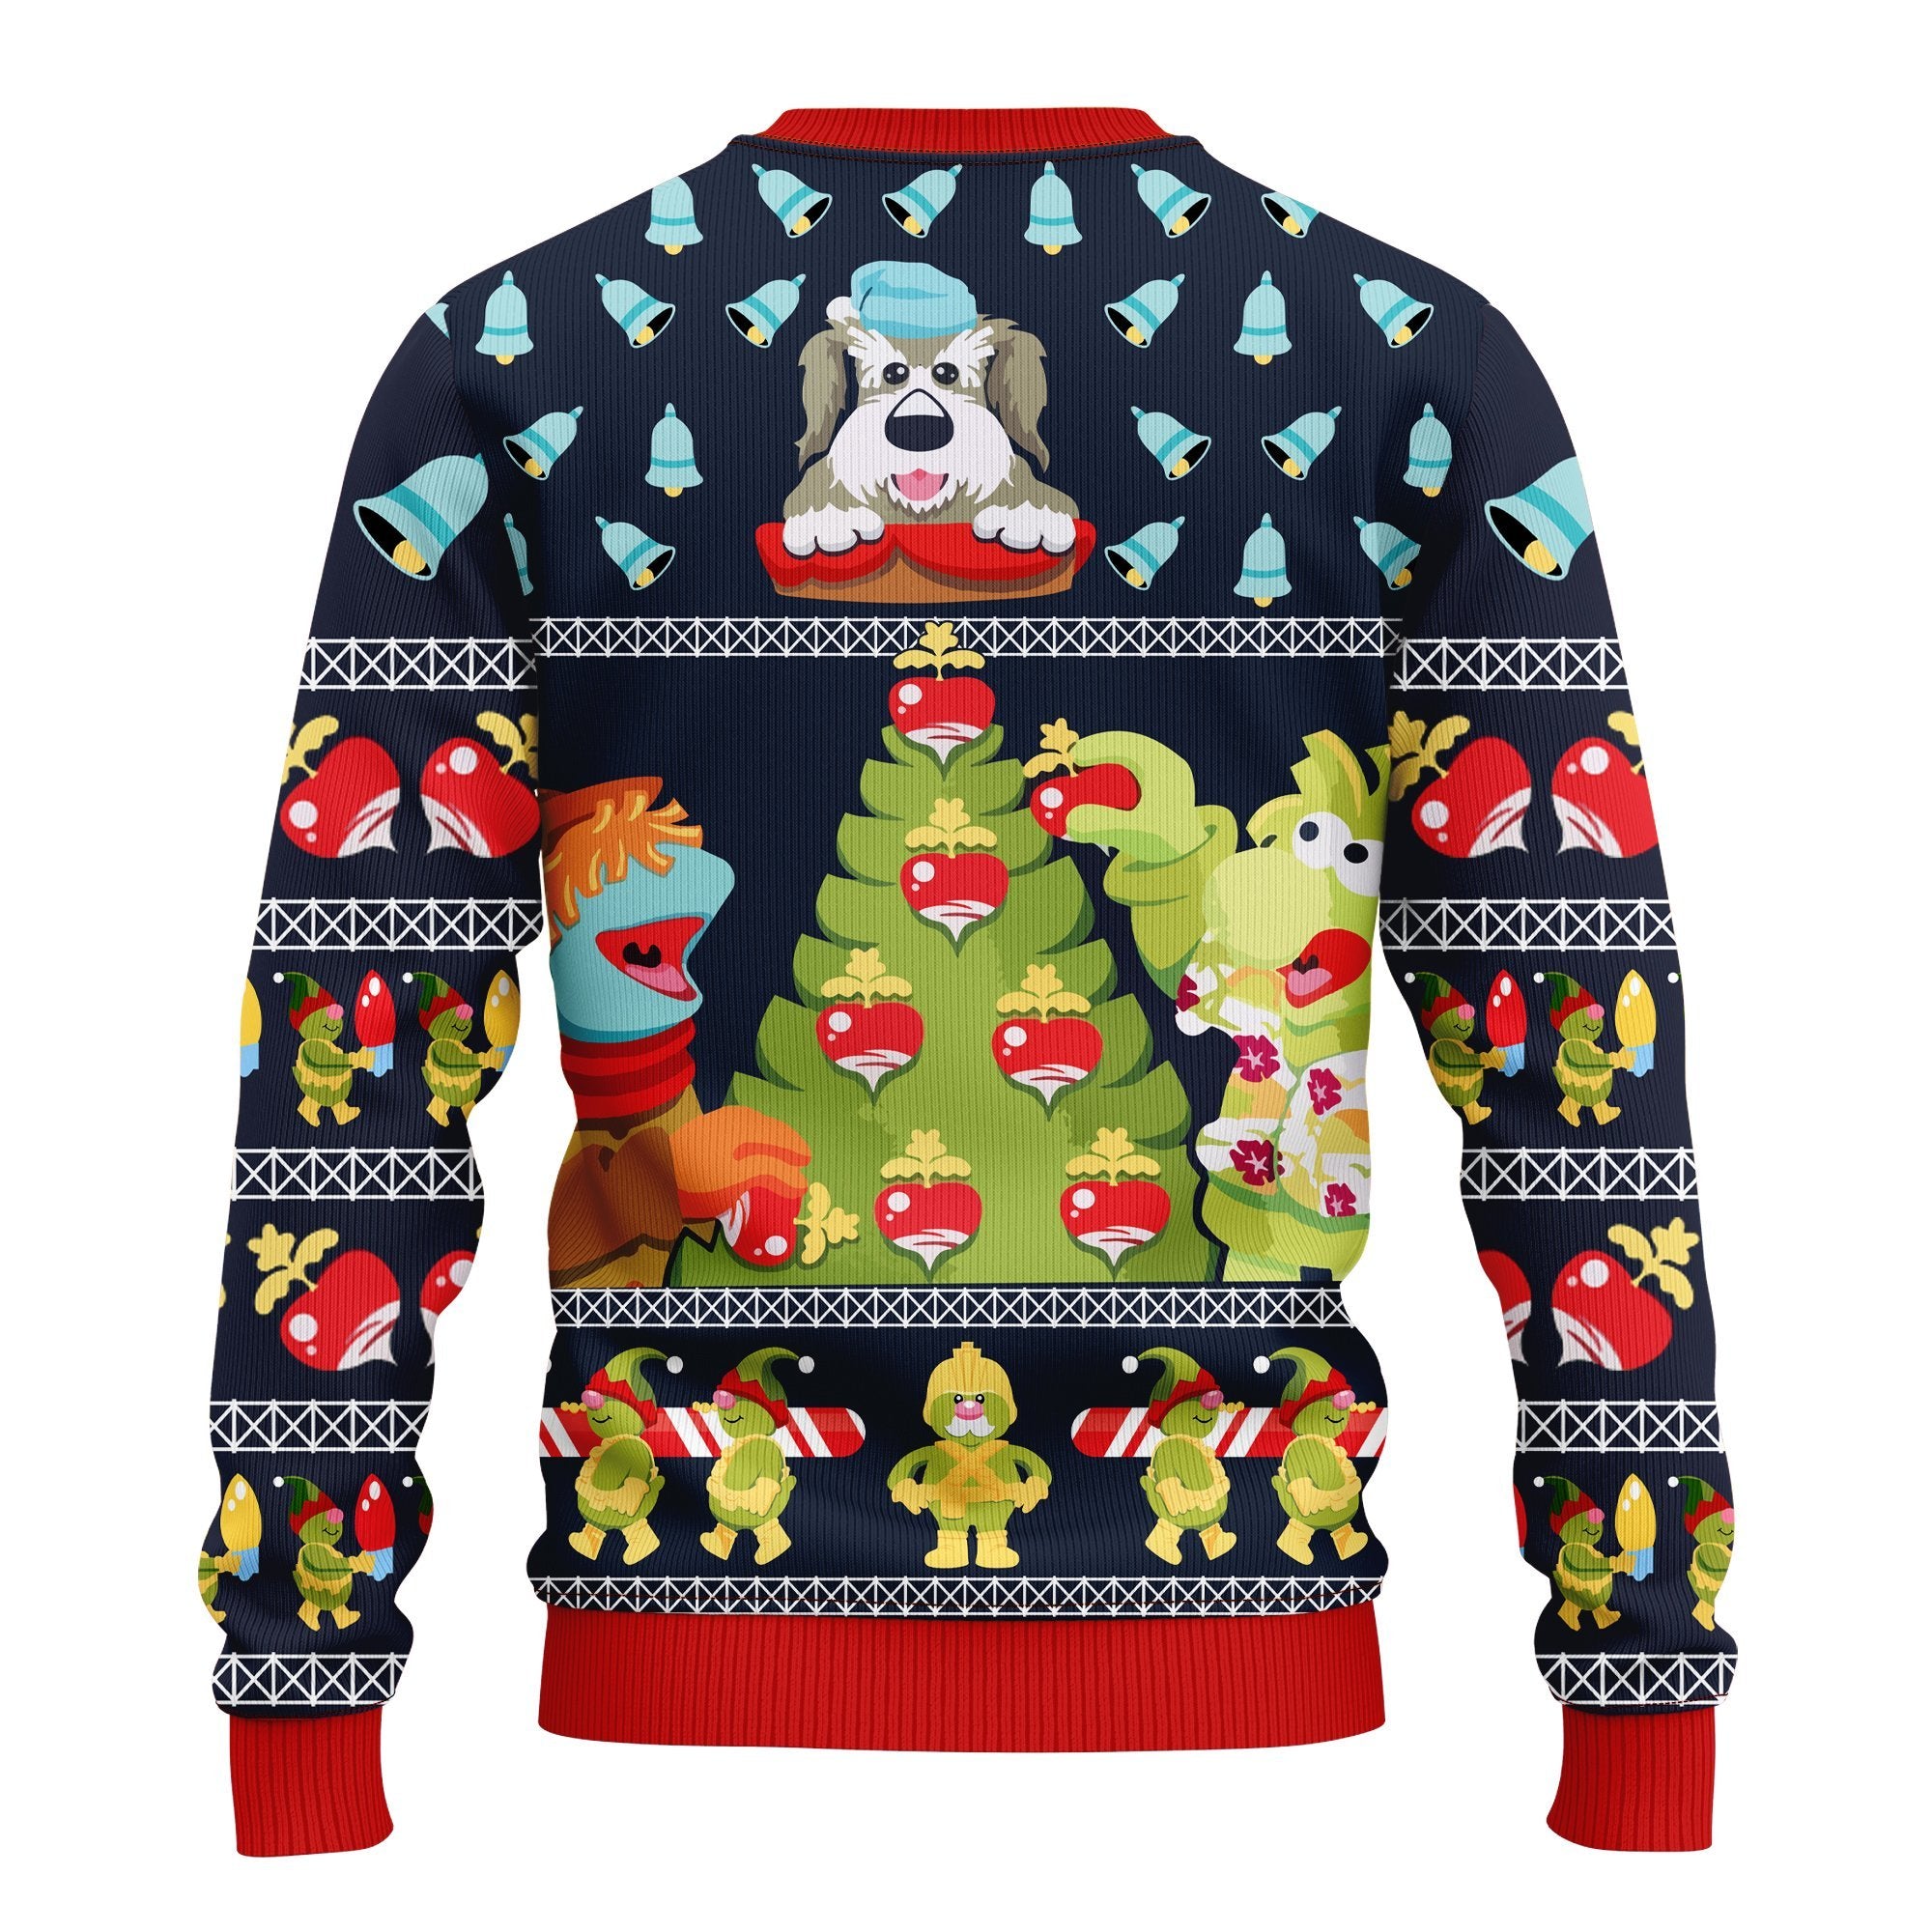 Fraggle Rock Sublimated Adult Ugly Christmas Sweater Amazing Gift Idea Thanksgiving Gift